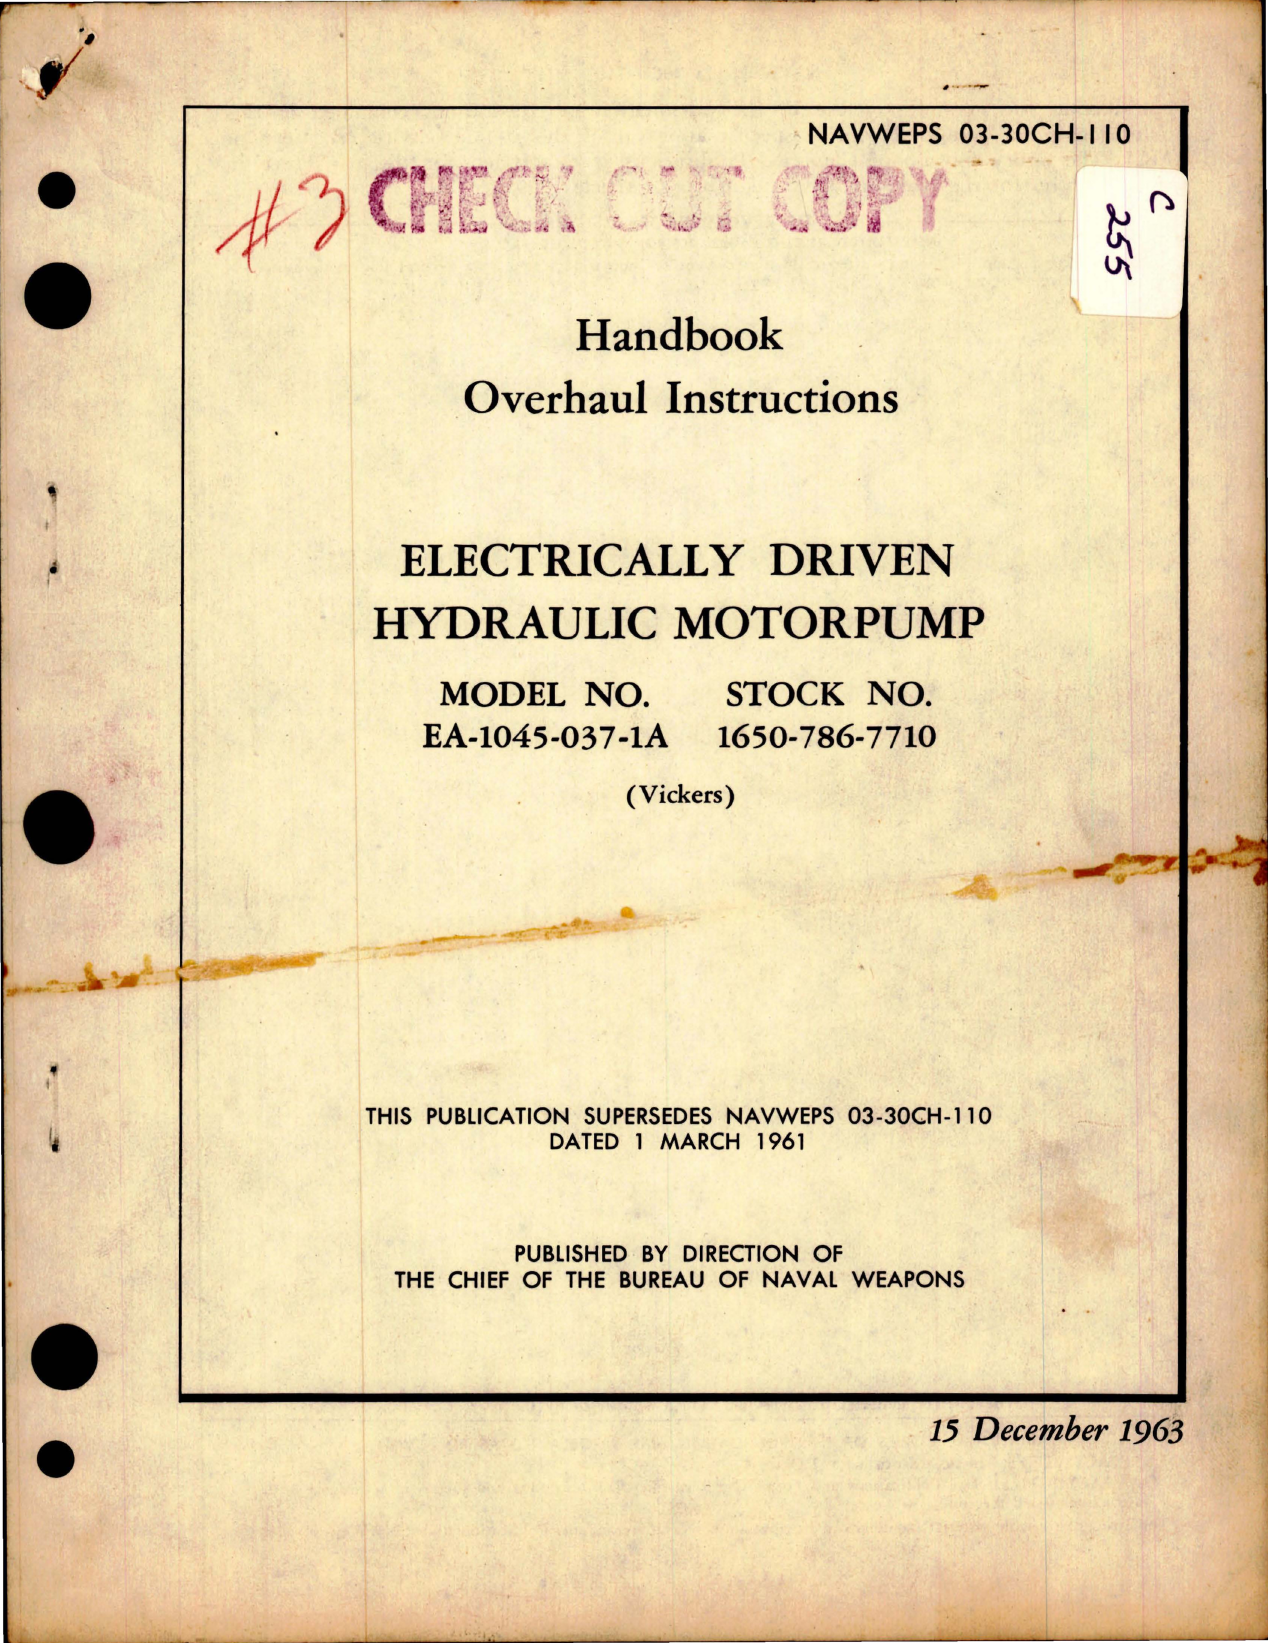 Sample page 1 from AirCorps Library document: Overhaul Instructions for Electrically Driven Hydraulic Motorpump - Model EA-1045-037-1A 